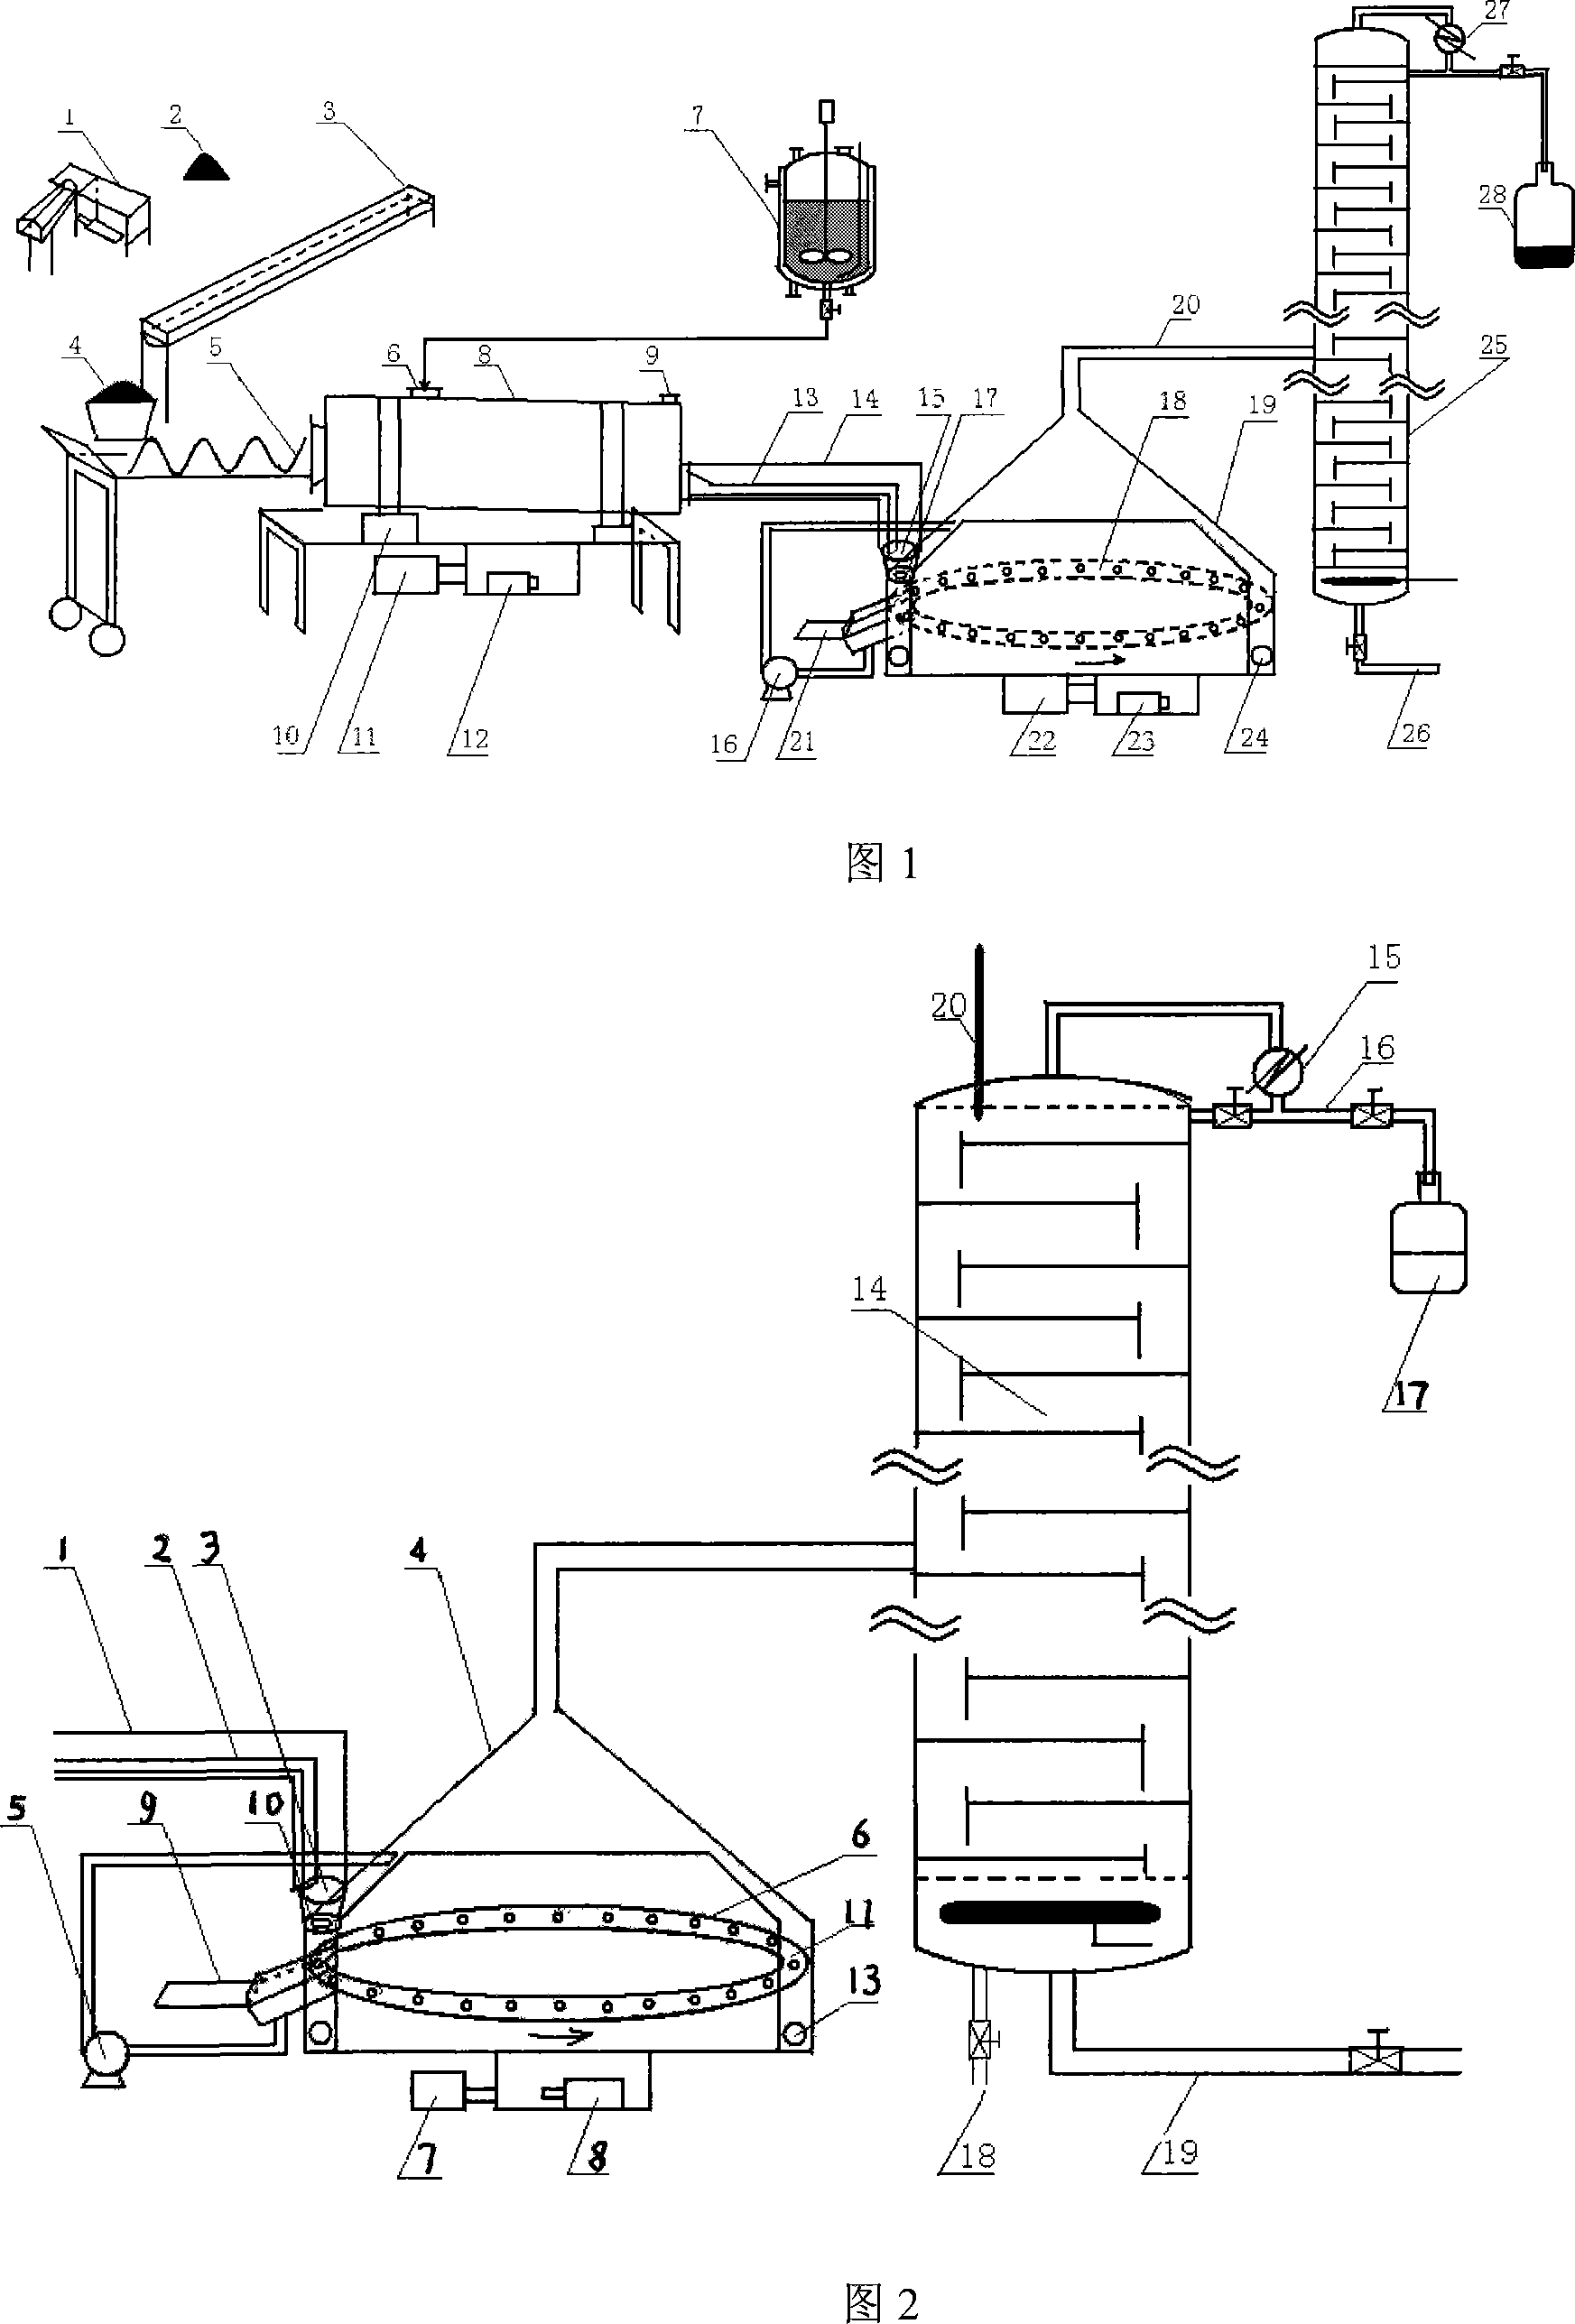 Method and system for separating ethanol based on sweet sorghum stalk solid ferment material